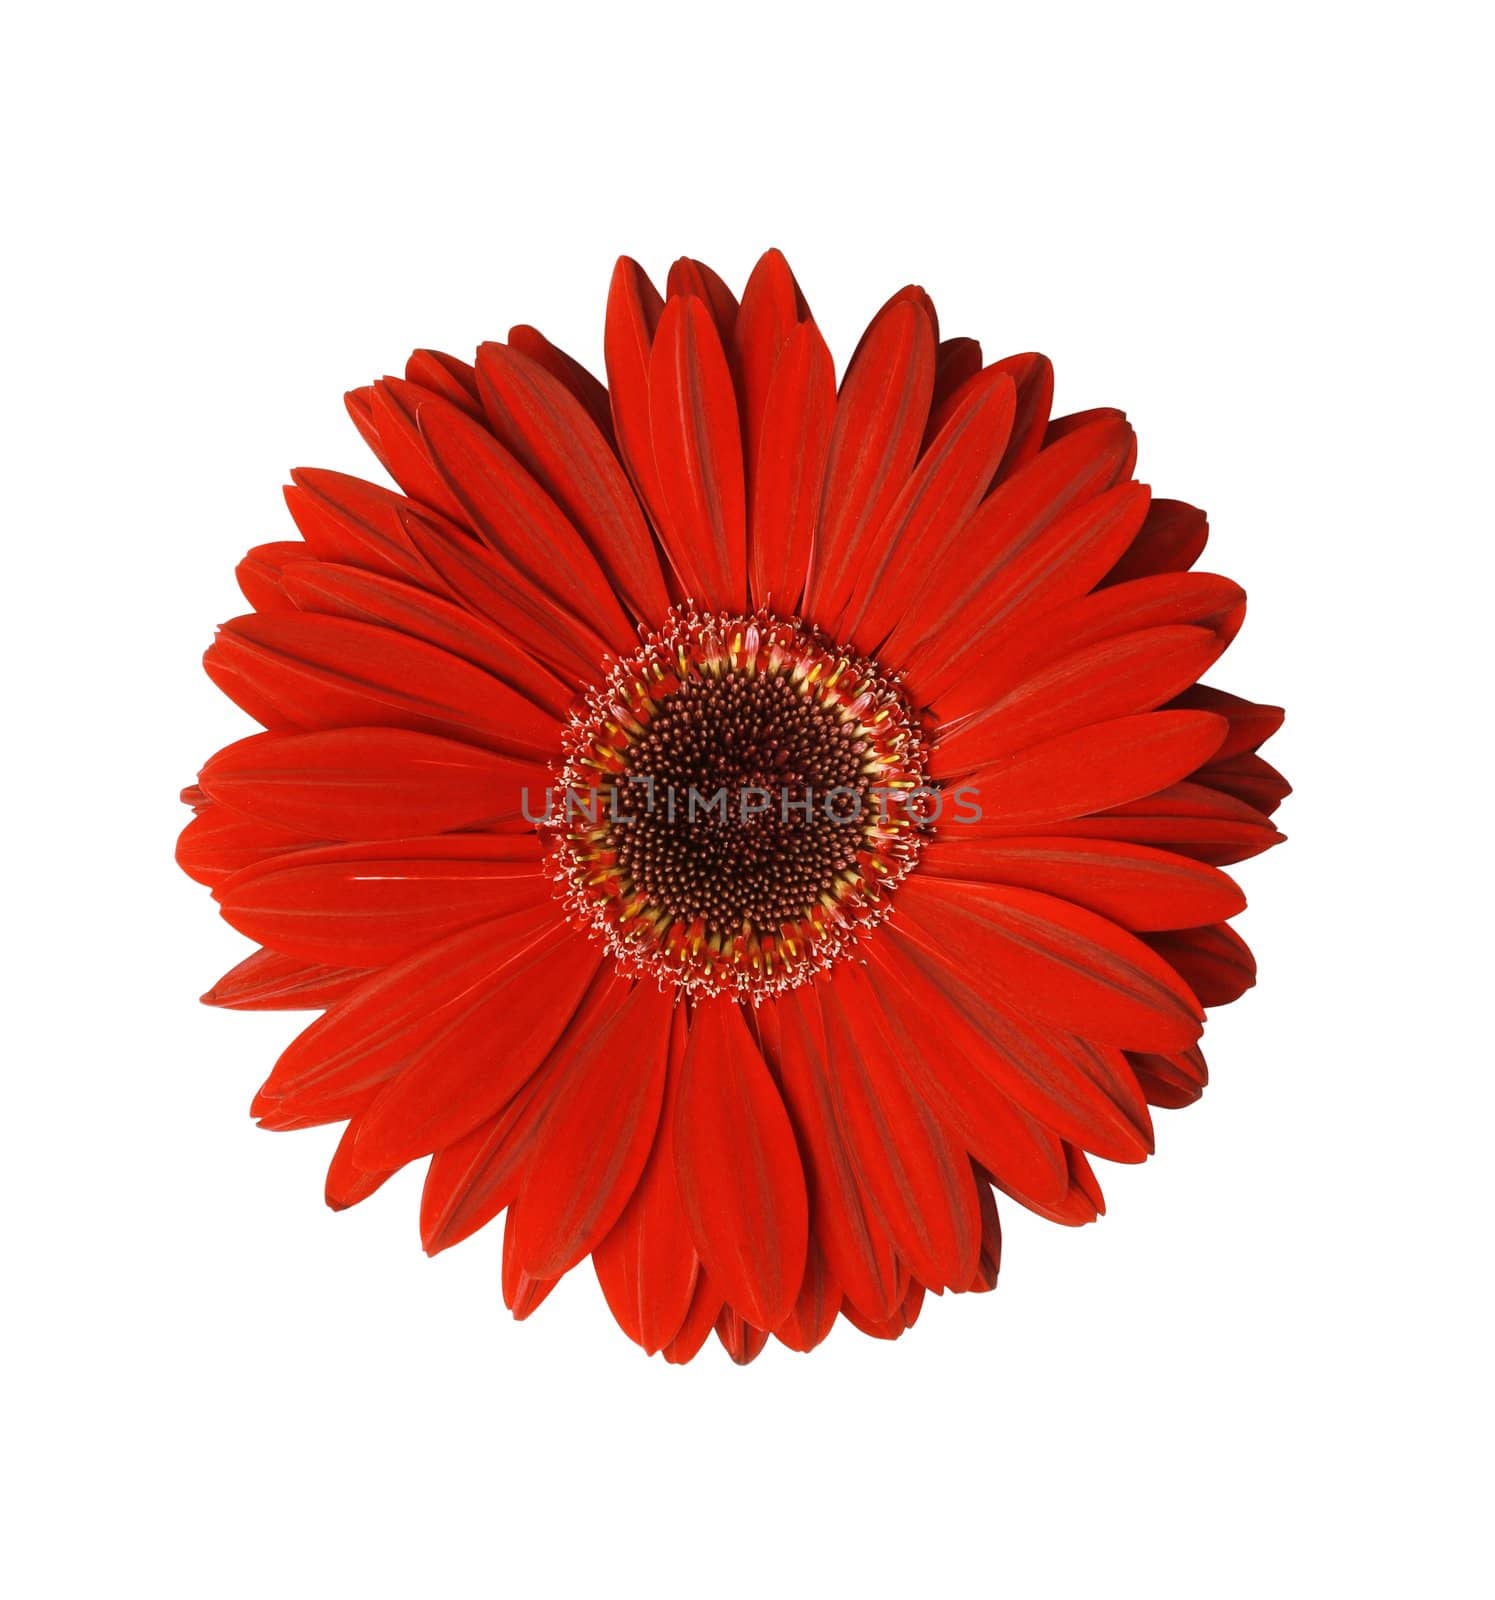 Beautiful Red Gerbera flower isolated with clipping path